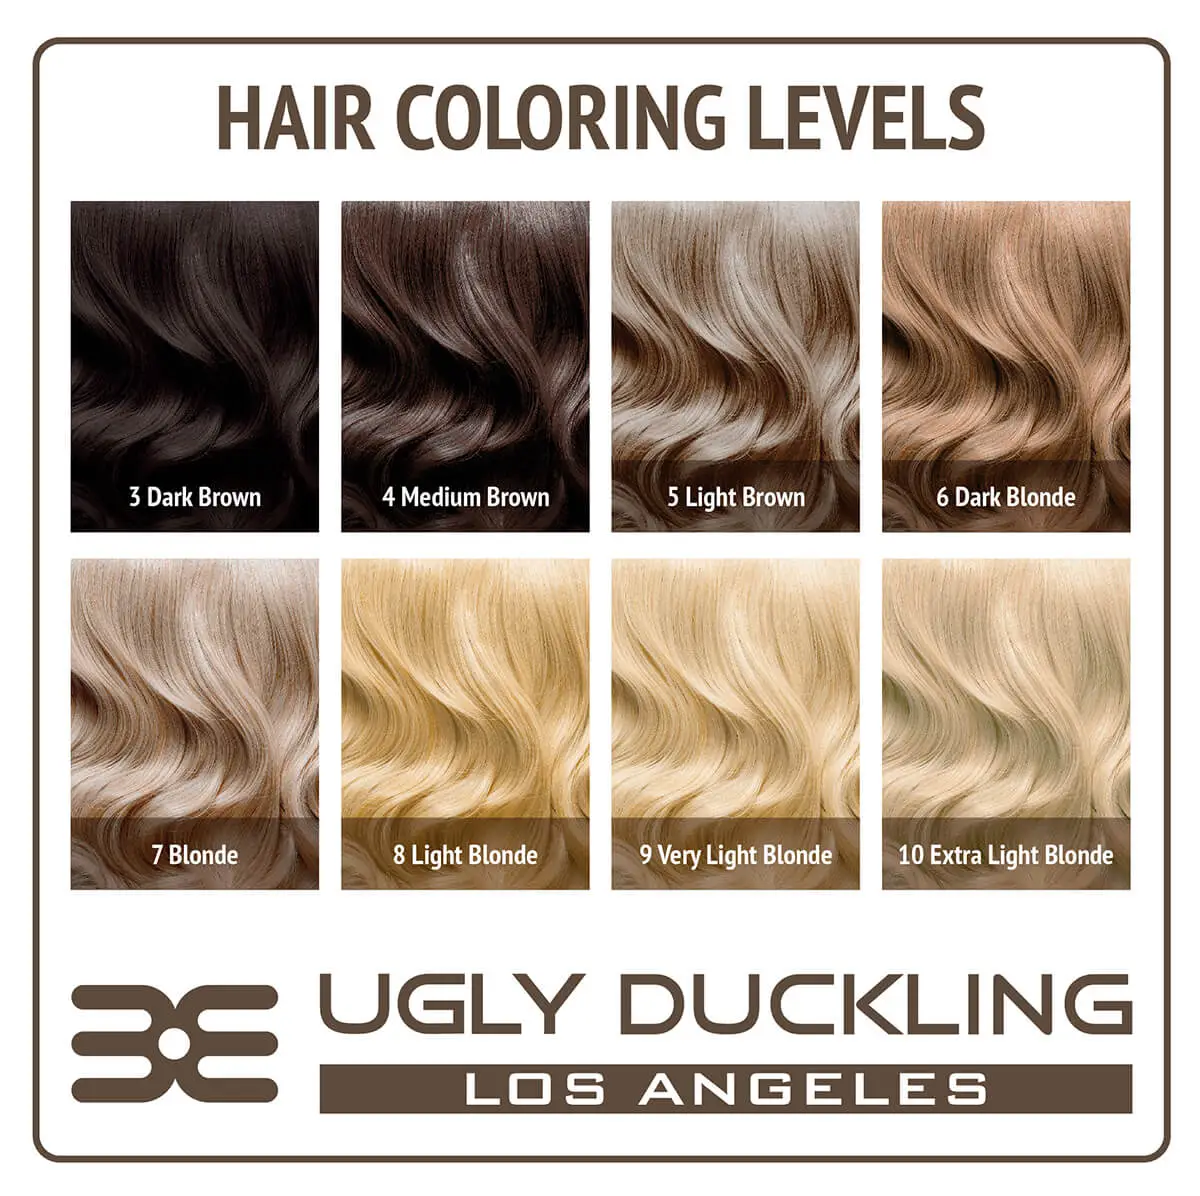 About Level 8 Hair Color